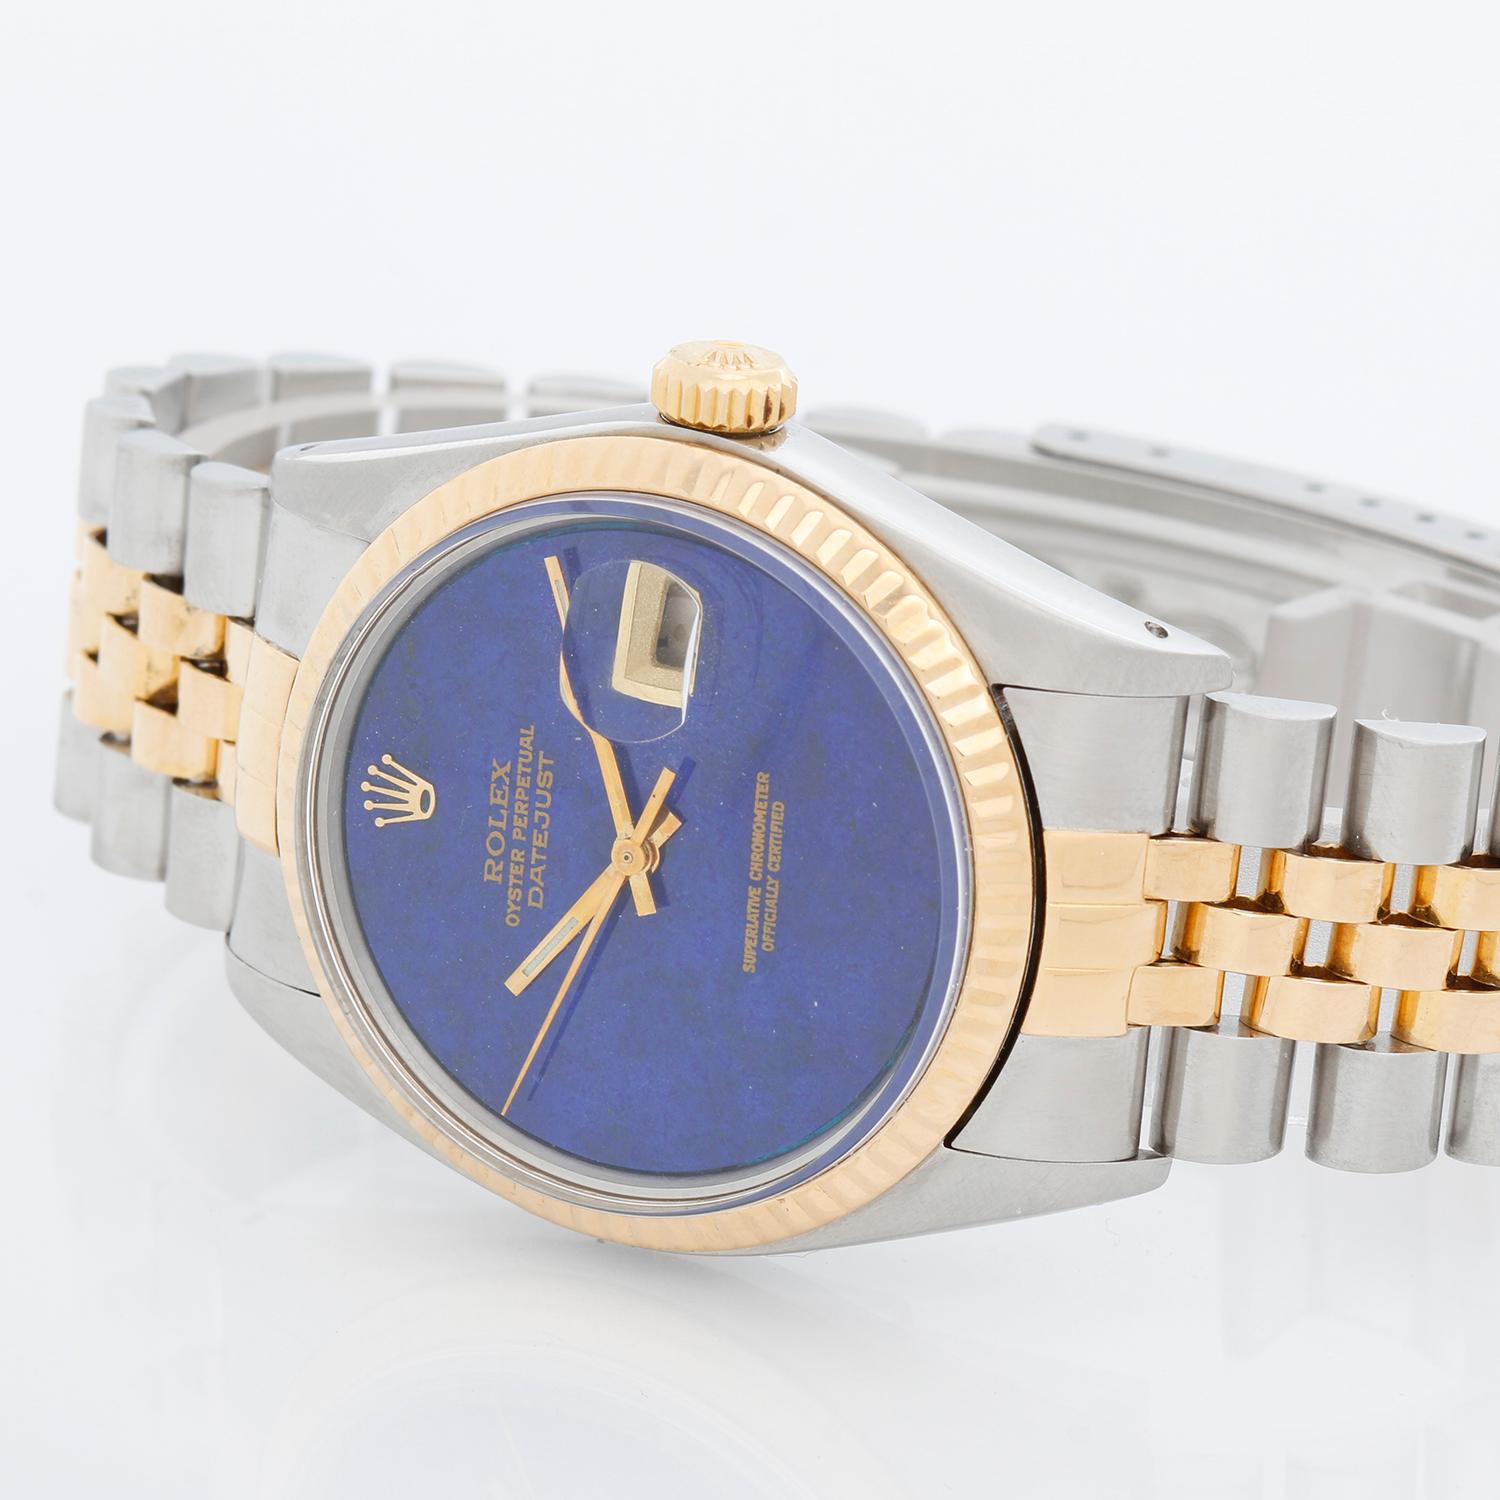 Men's Rolex Datejust 2-Tone Watch 16013 - Automatic winding, 27 jewels, Quickset, acrylic crystal. Stainless steel case with fluted bezel. Custom Lapis Lazuli dial . 2-Tone Jubilee bracelet. Pre-owned with custom box.